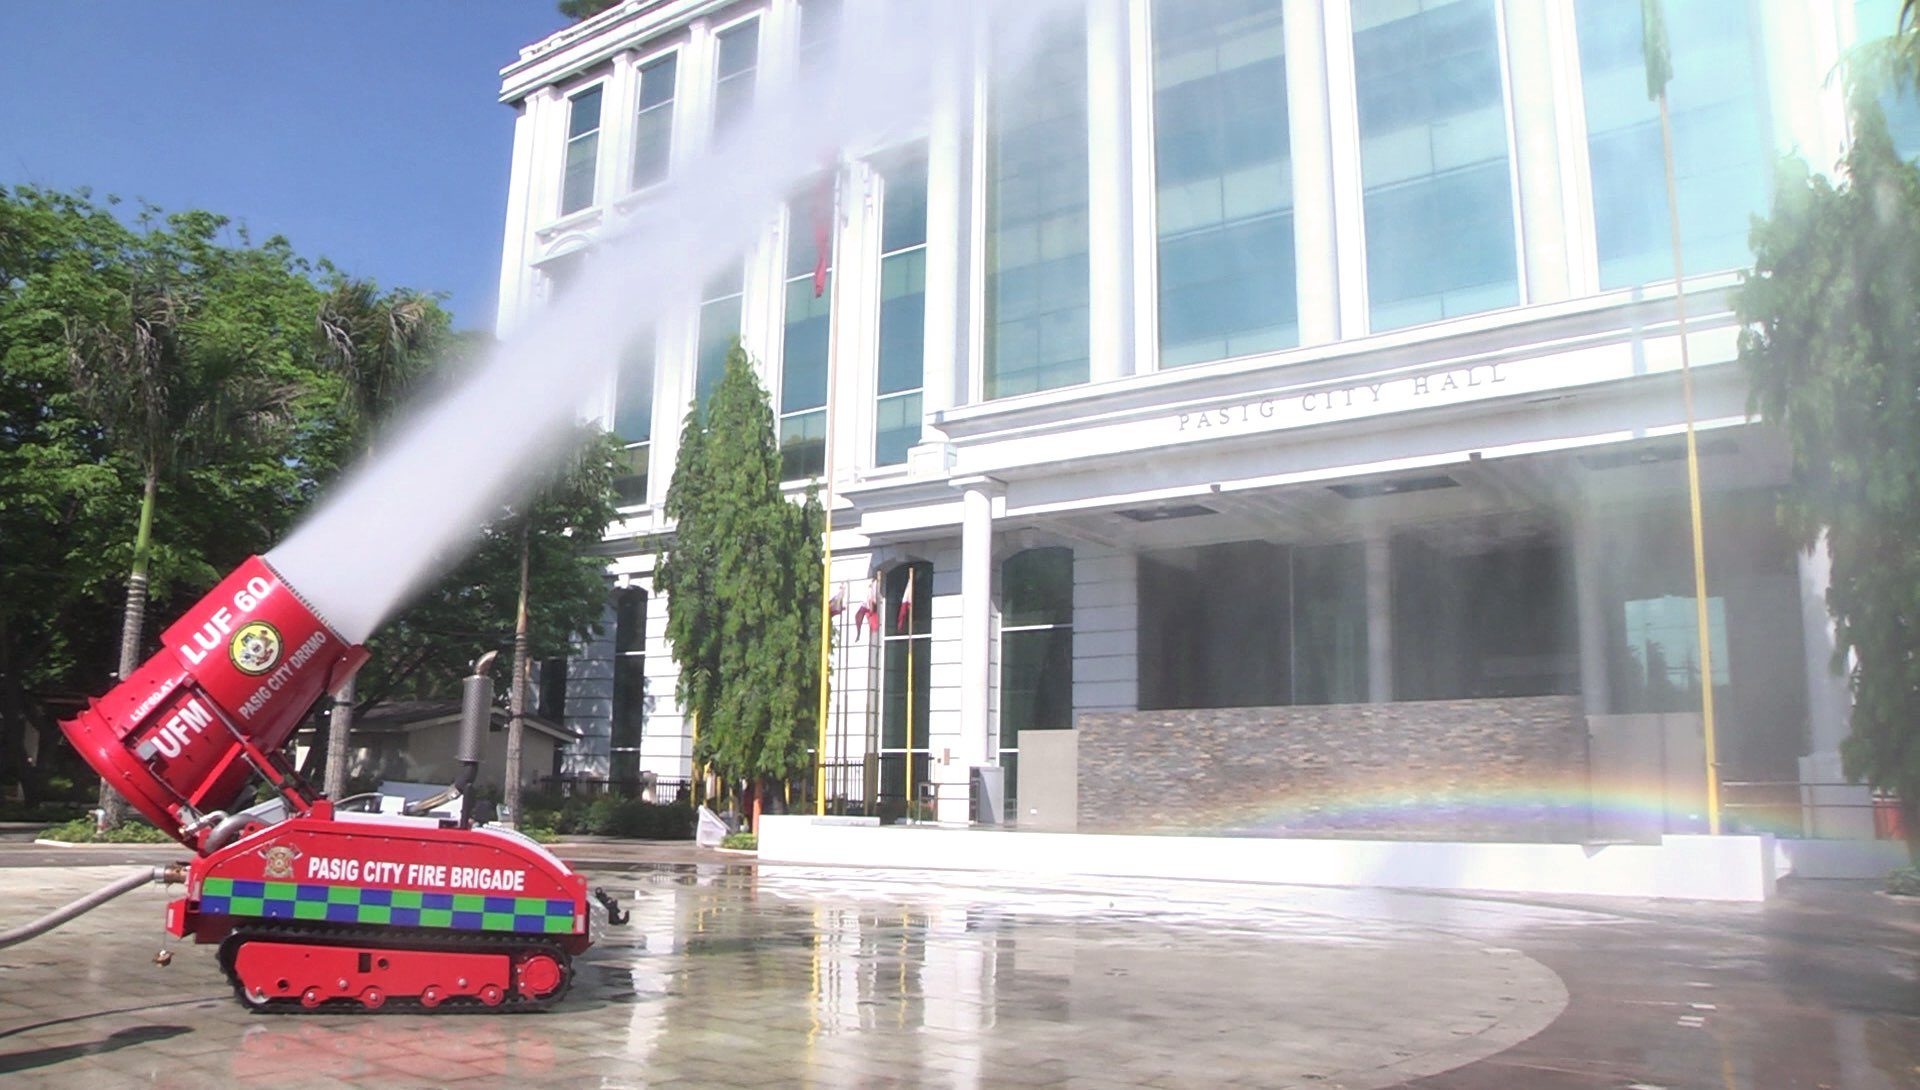 COOL DOWN. The Pasig DRRM showcases the capabilities of the Unmanned Firefighting Machine through a demonstration in front of the Pasig City Hall on April 26. Photo by Charlie Delgado/Rappler 